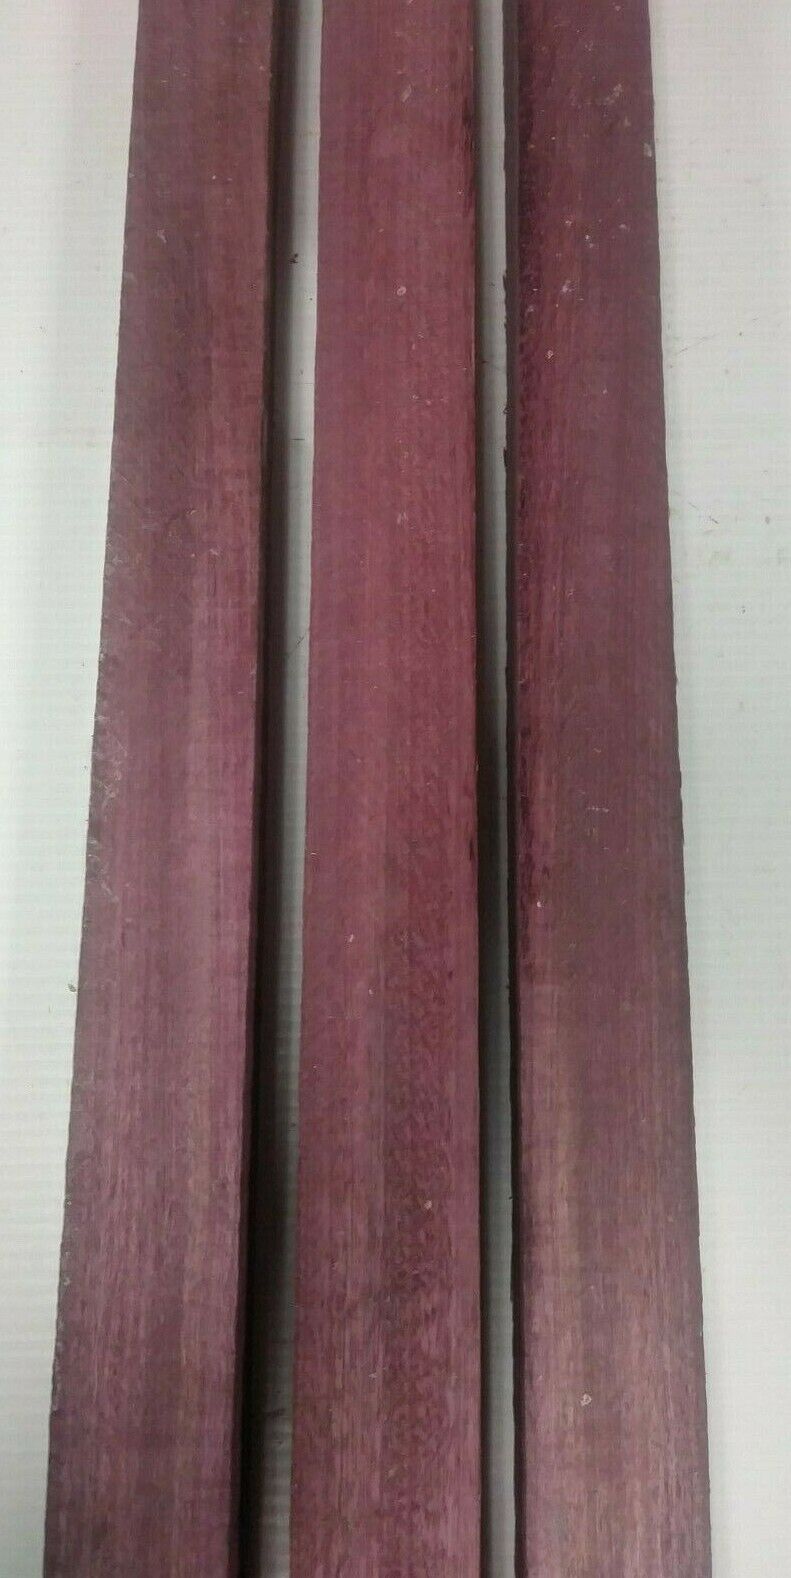 LOT OF 3 PIECES PURPLEHEART THIN STOCK BOARDS LUMBER CRAFTS WOOD 1/4" X 2" X 12" EXOTIC WOOD ZONE Does Not Apply - фотография #3